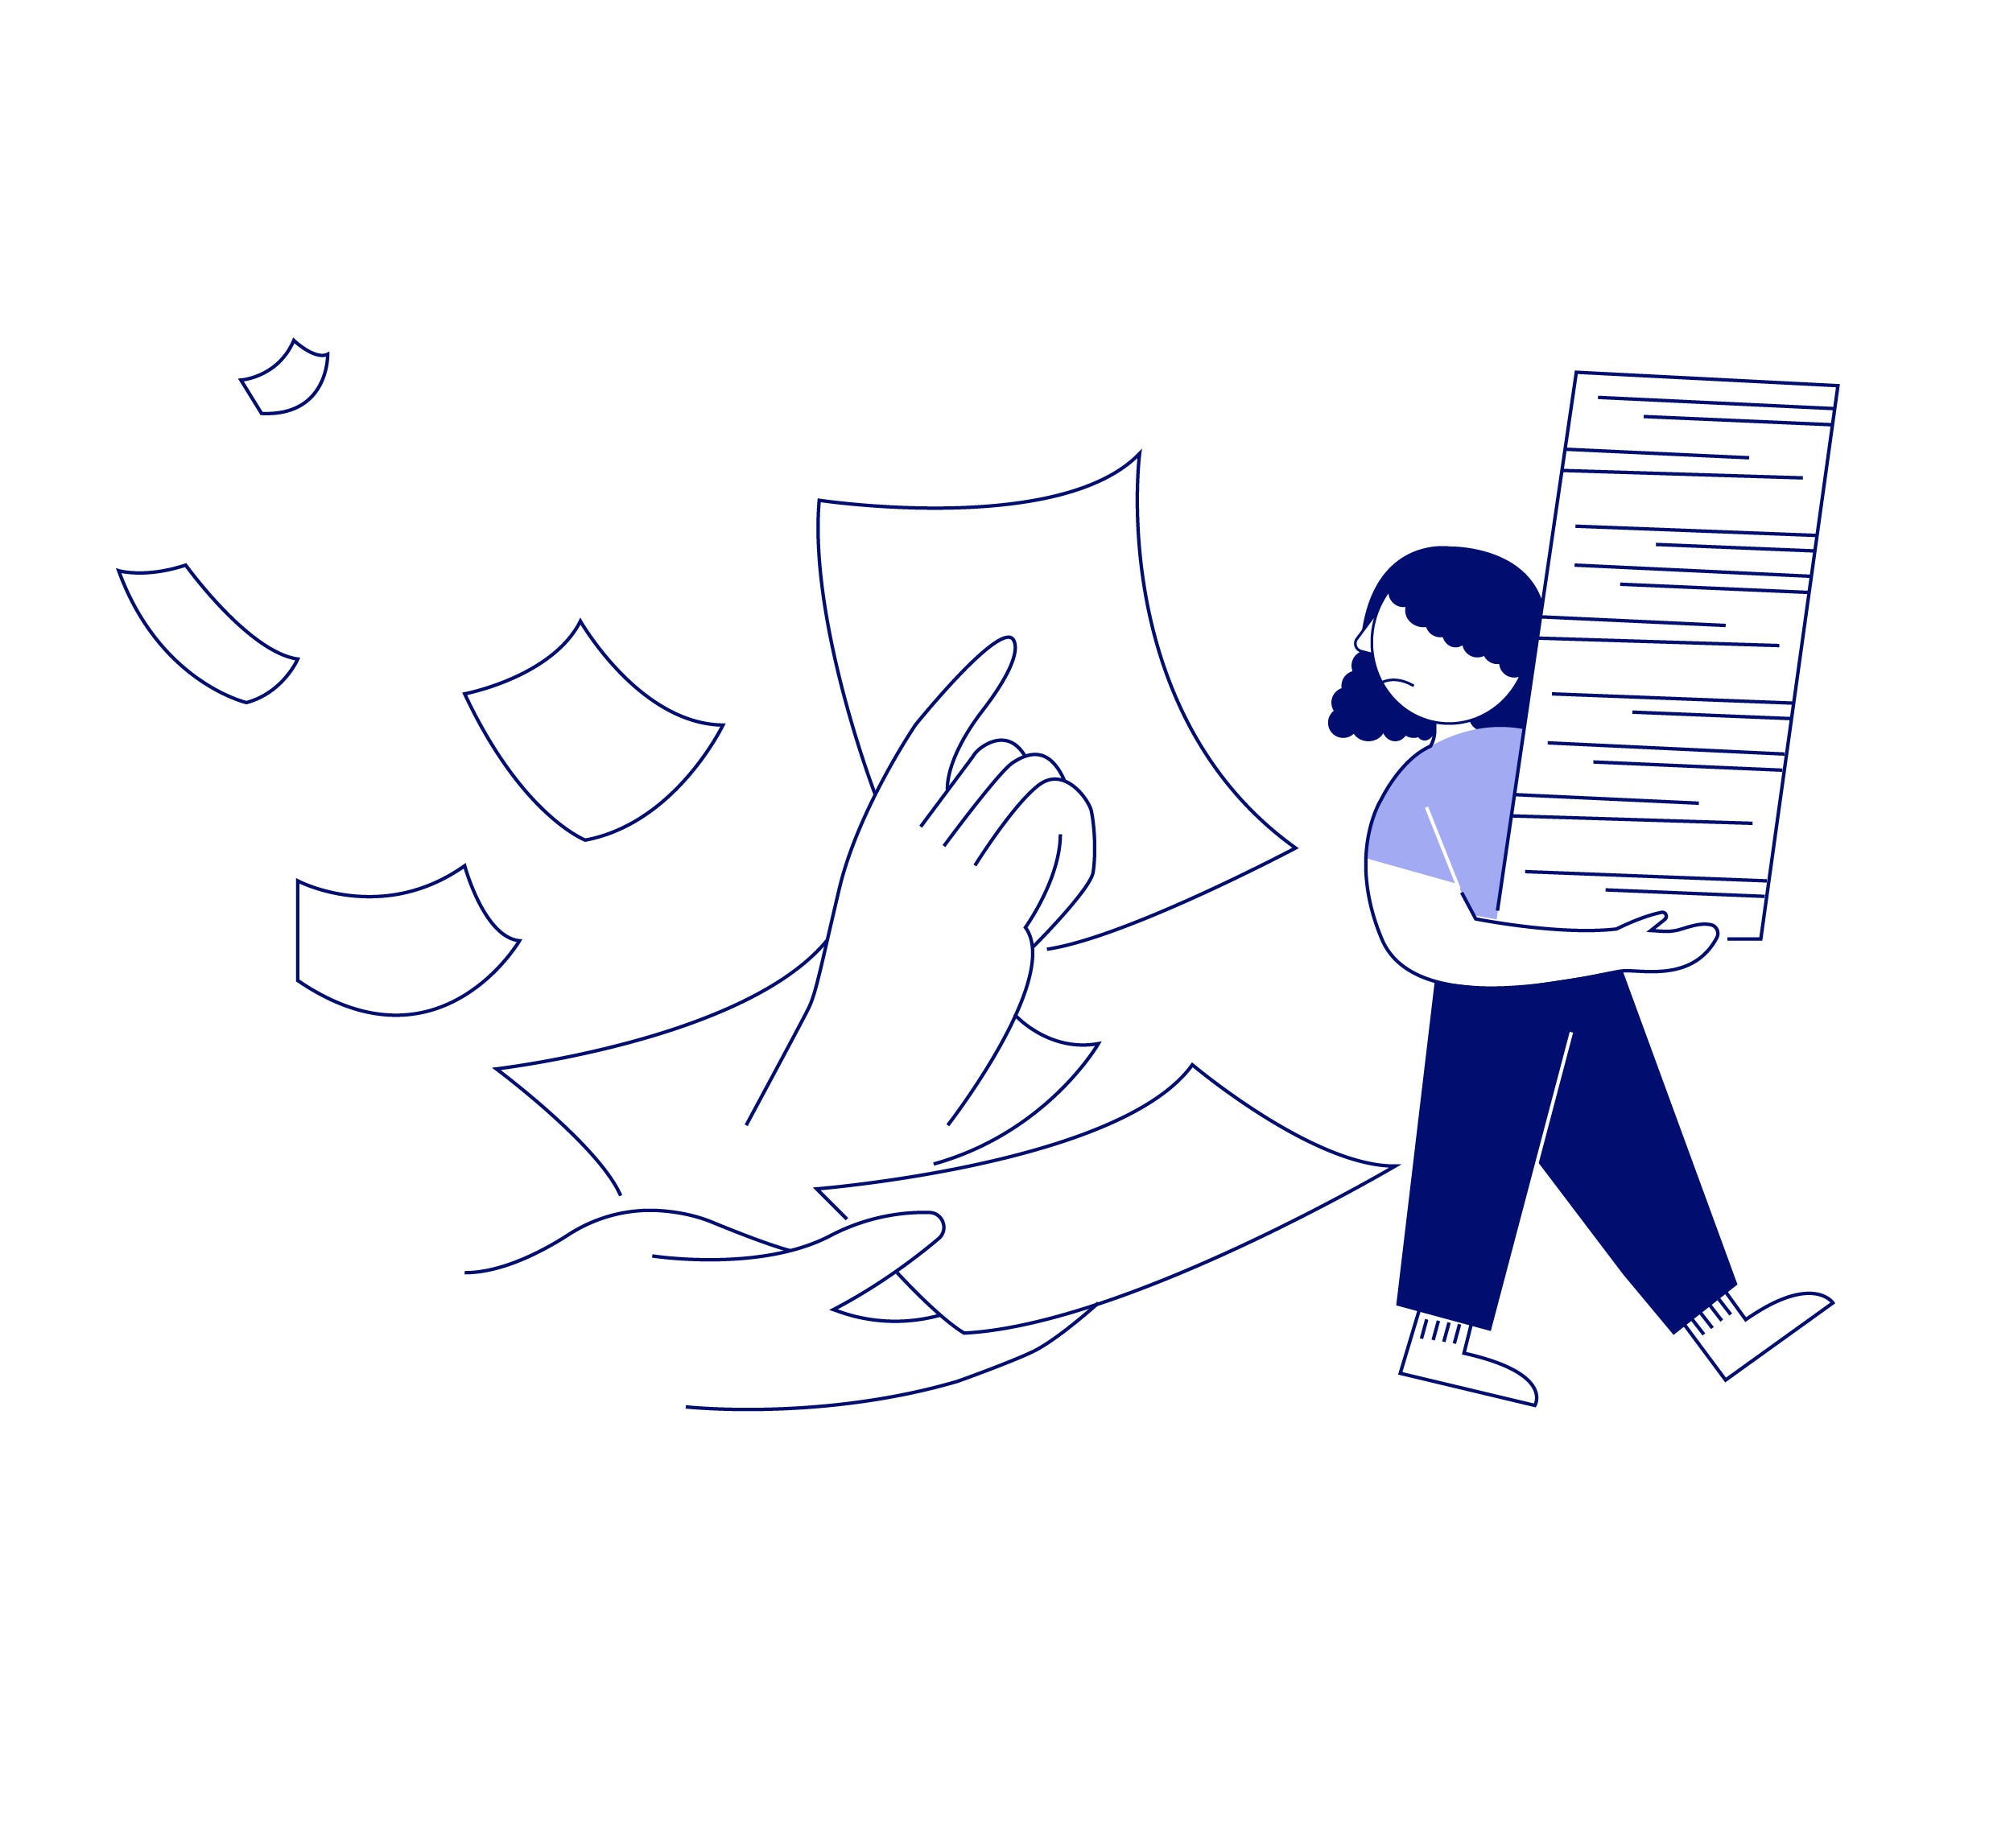 Illustration of woman with curly hair wearing pants carrying a large piece of paper being followed by more paper and pointing hands